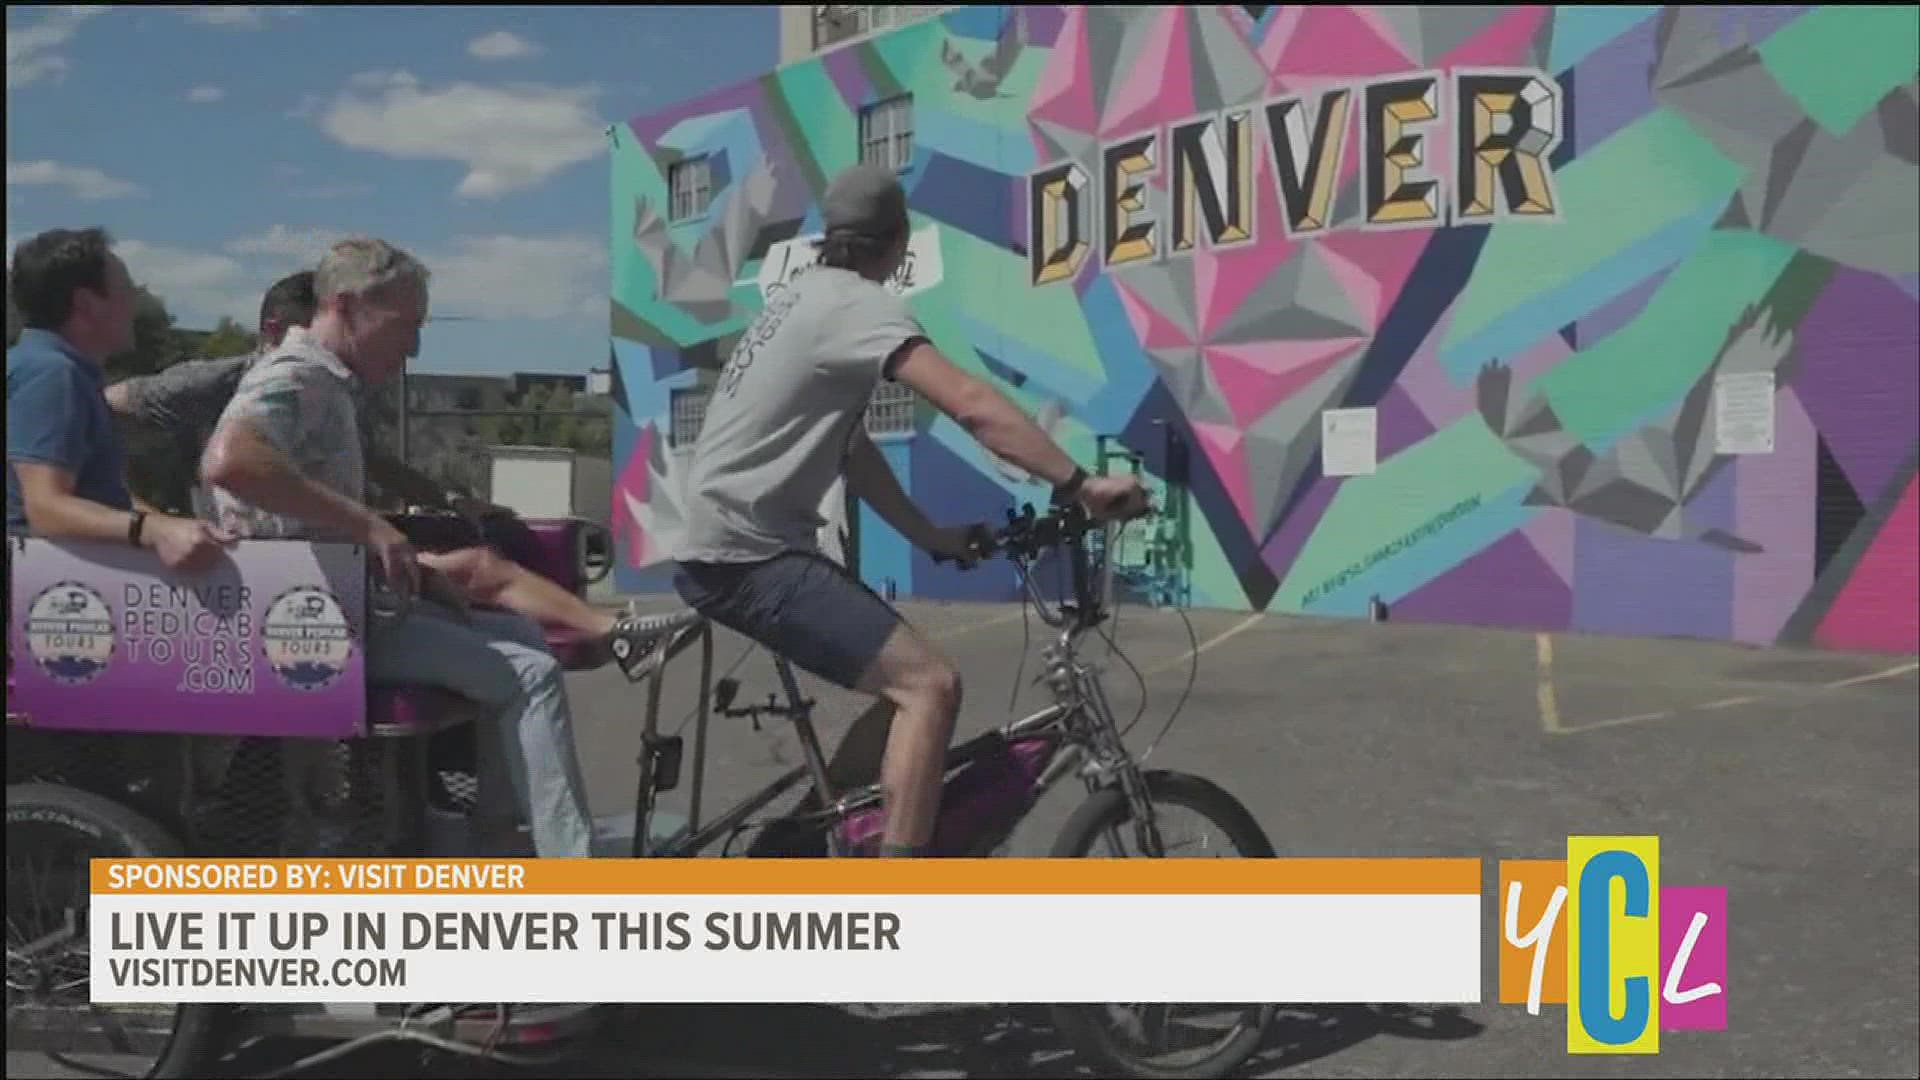 See what everyone should know about planning a vacation in the mile high city. This segment paid for by Visit Denver.